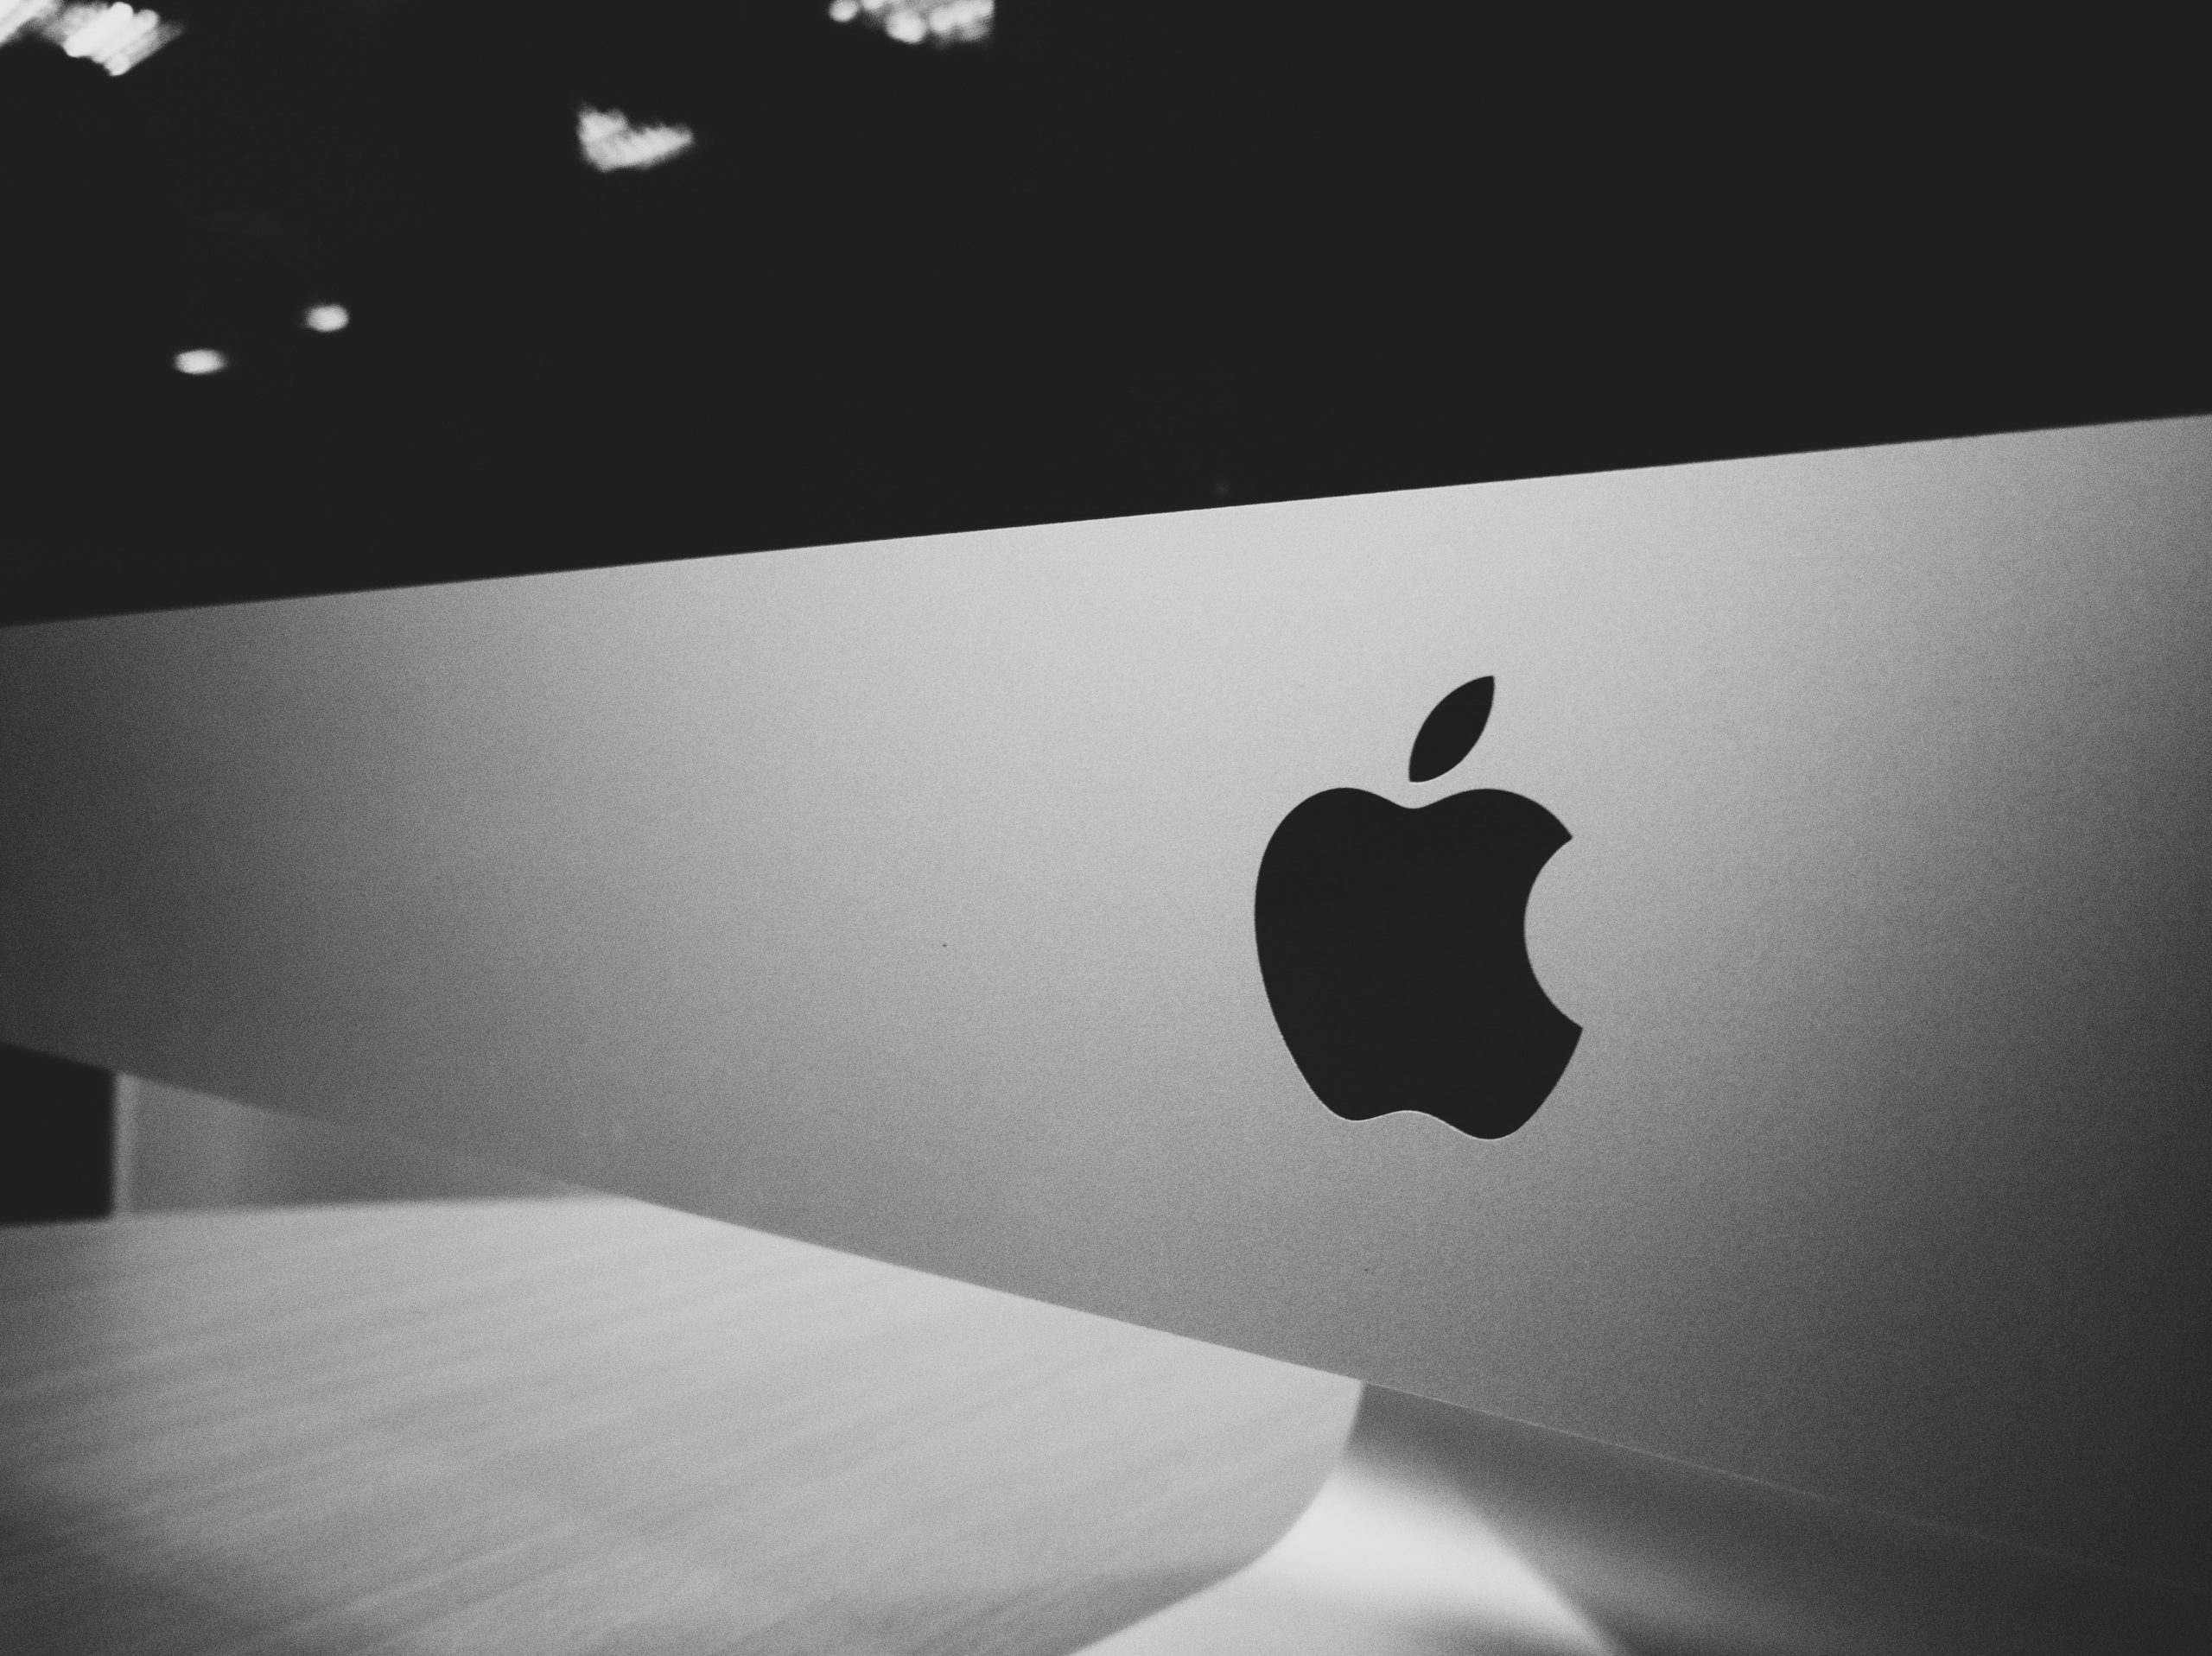 Patent reveals a new virtual acoustic system can be brought by Apple to MacBooks.